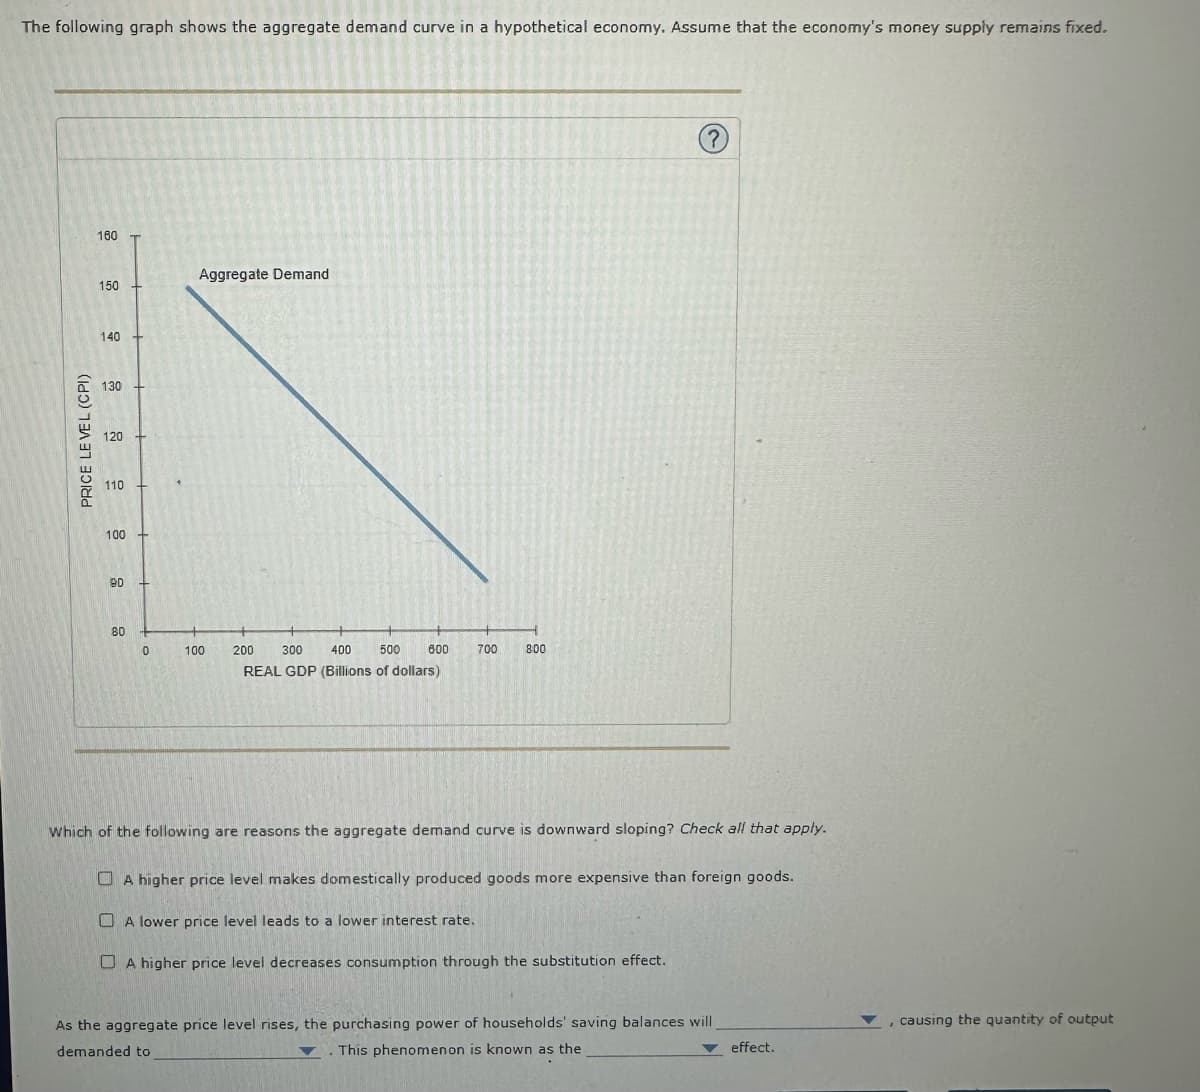 The following graph shows the aggregate demand curve in a hypothetical economy. Assume that the economy's money supply remains fixed.
PRICE LEVEL (CPI)
180 T
150
140
130
120
110
100
90
80
0
Aggregate Demand
100
200
300 400 500 600
REAL GDP (Billions of dollars)
700
800
(?)
Which of the following are reasons the aggregate demand curve is downward sloping? Check all that apply.
A higher price level makes domestically produced goods more expensive than foreign goods.
A lower price level leads to a lower interest rate.
A higher price level decreases consumption through the substitution effect.
As the aggregate price level rises, the purchasing power of households' saving balances will
demanded to
This phenomenon is known as the
effect.
causing the quantity of output